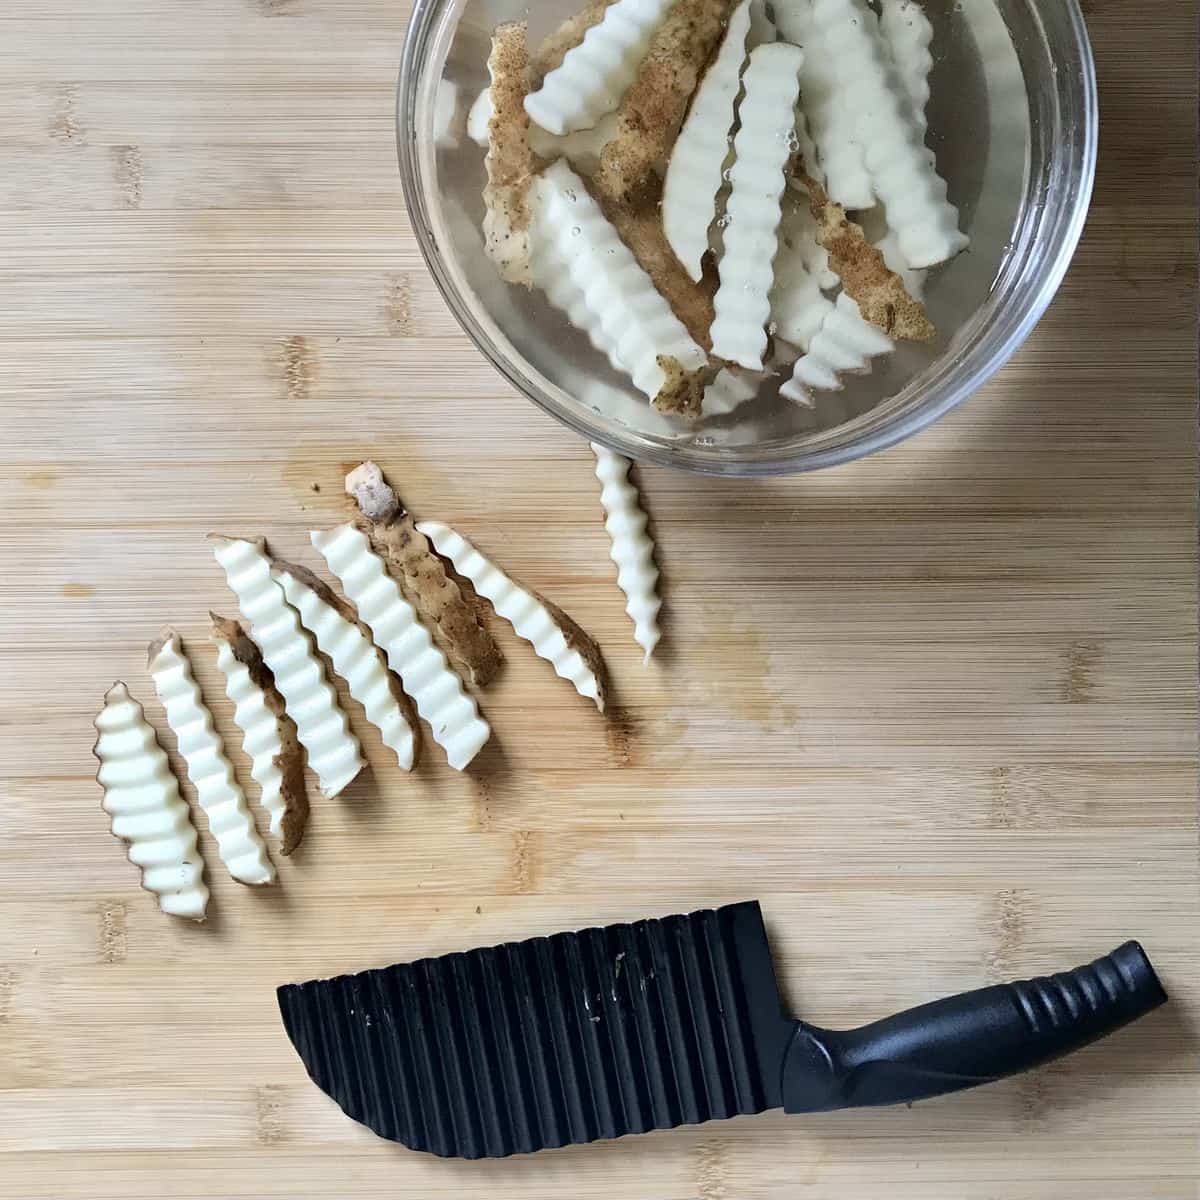 Crinkle cut fries on a wooden board next to a bowl of water with sliced potatoes in it.